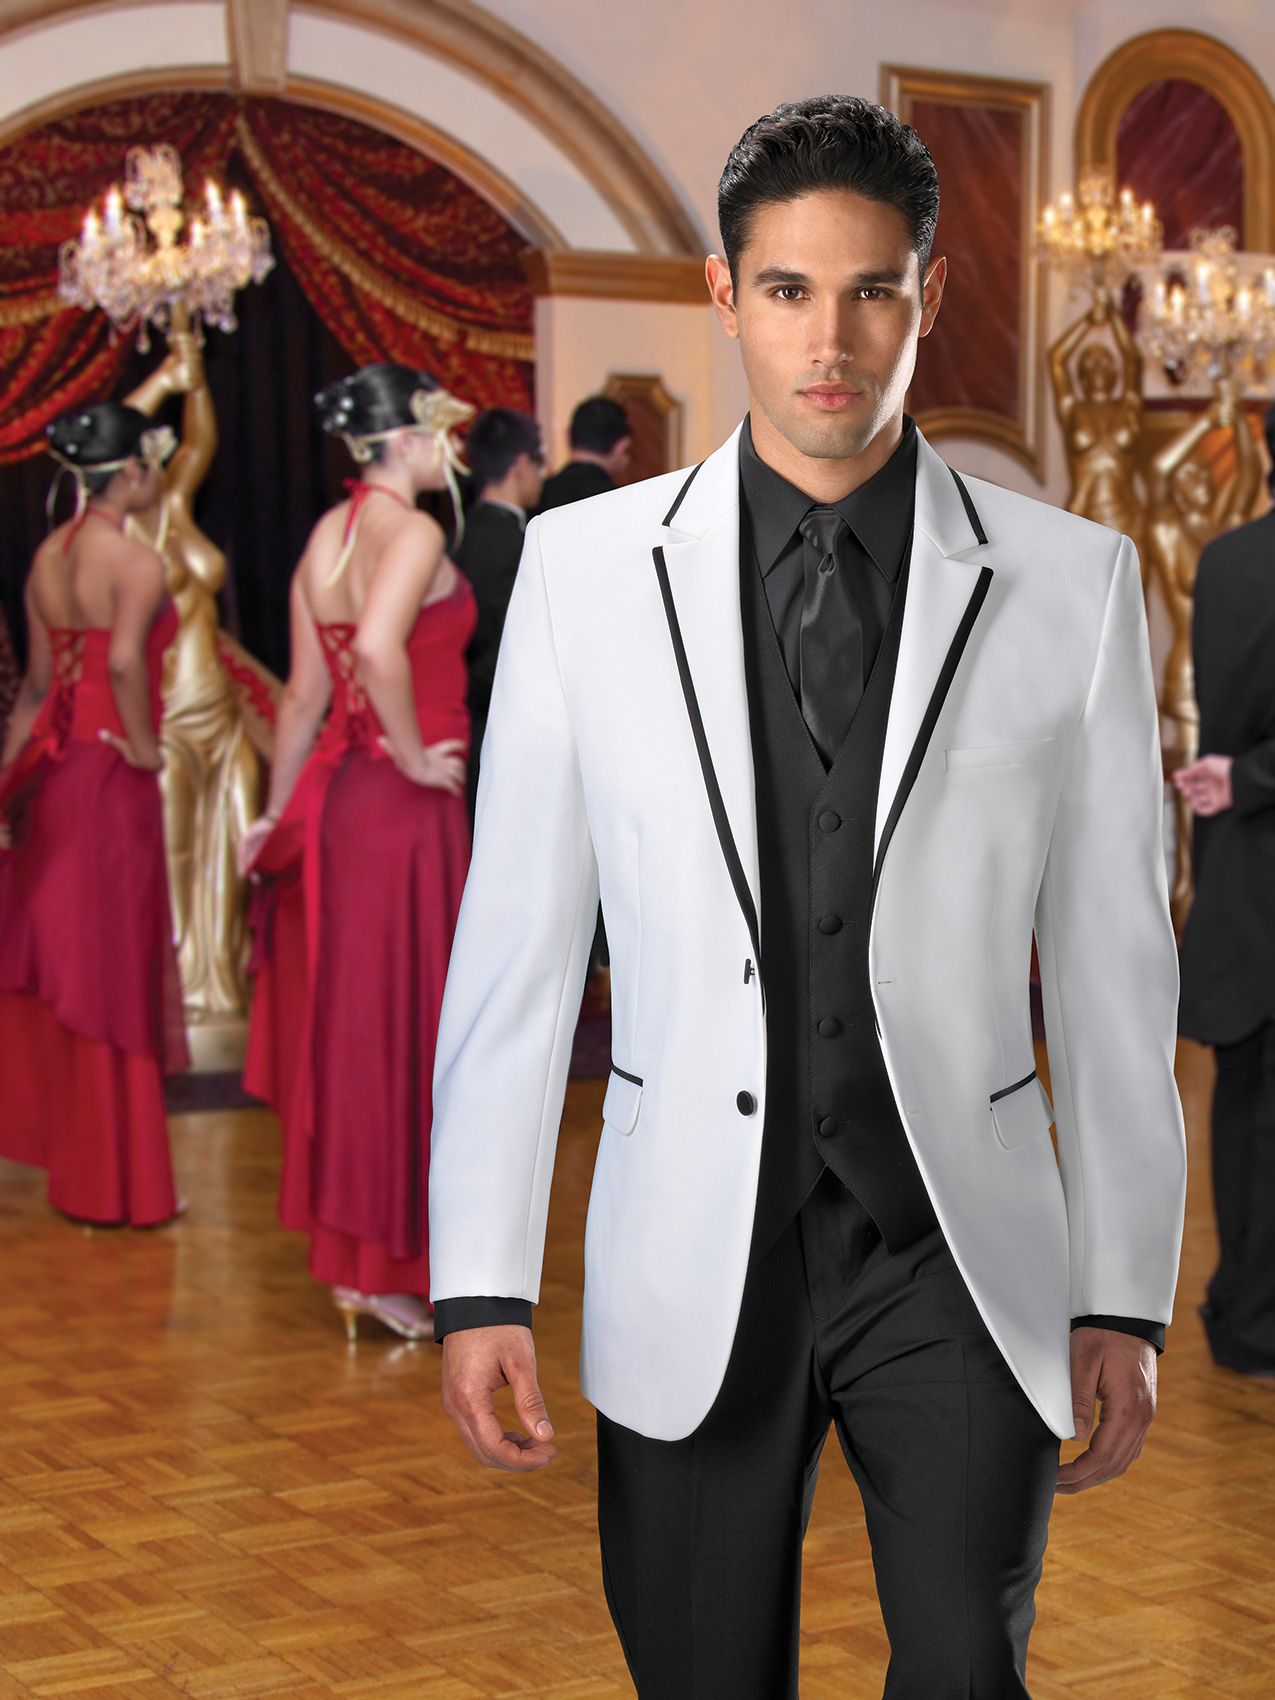 Top Tuxedo Shops in Southern California - My Quince